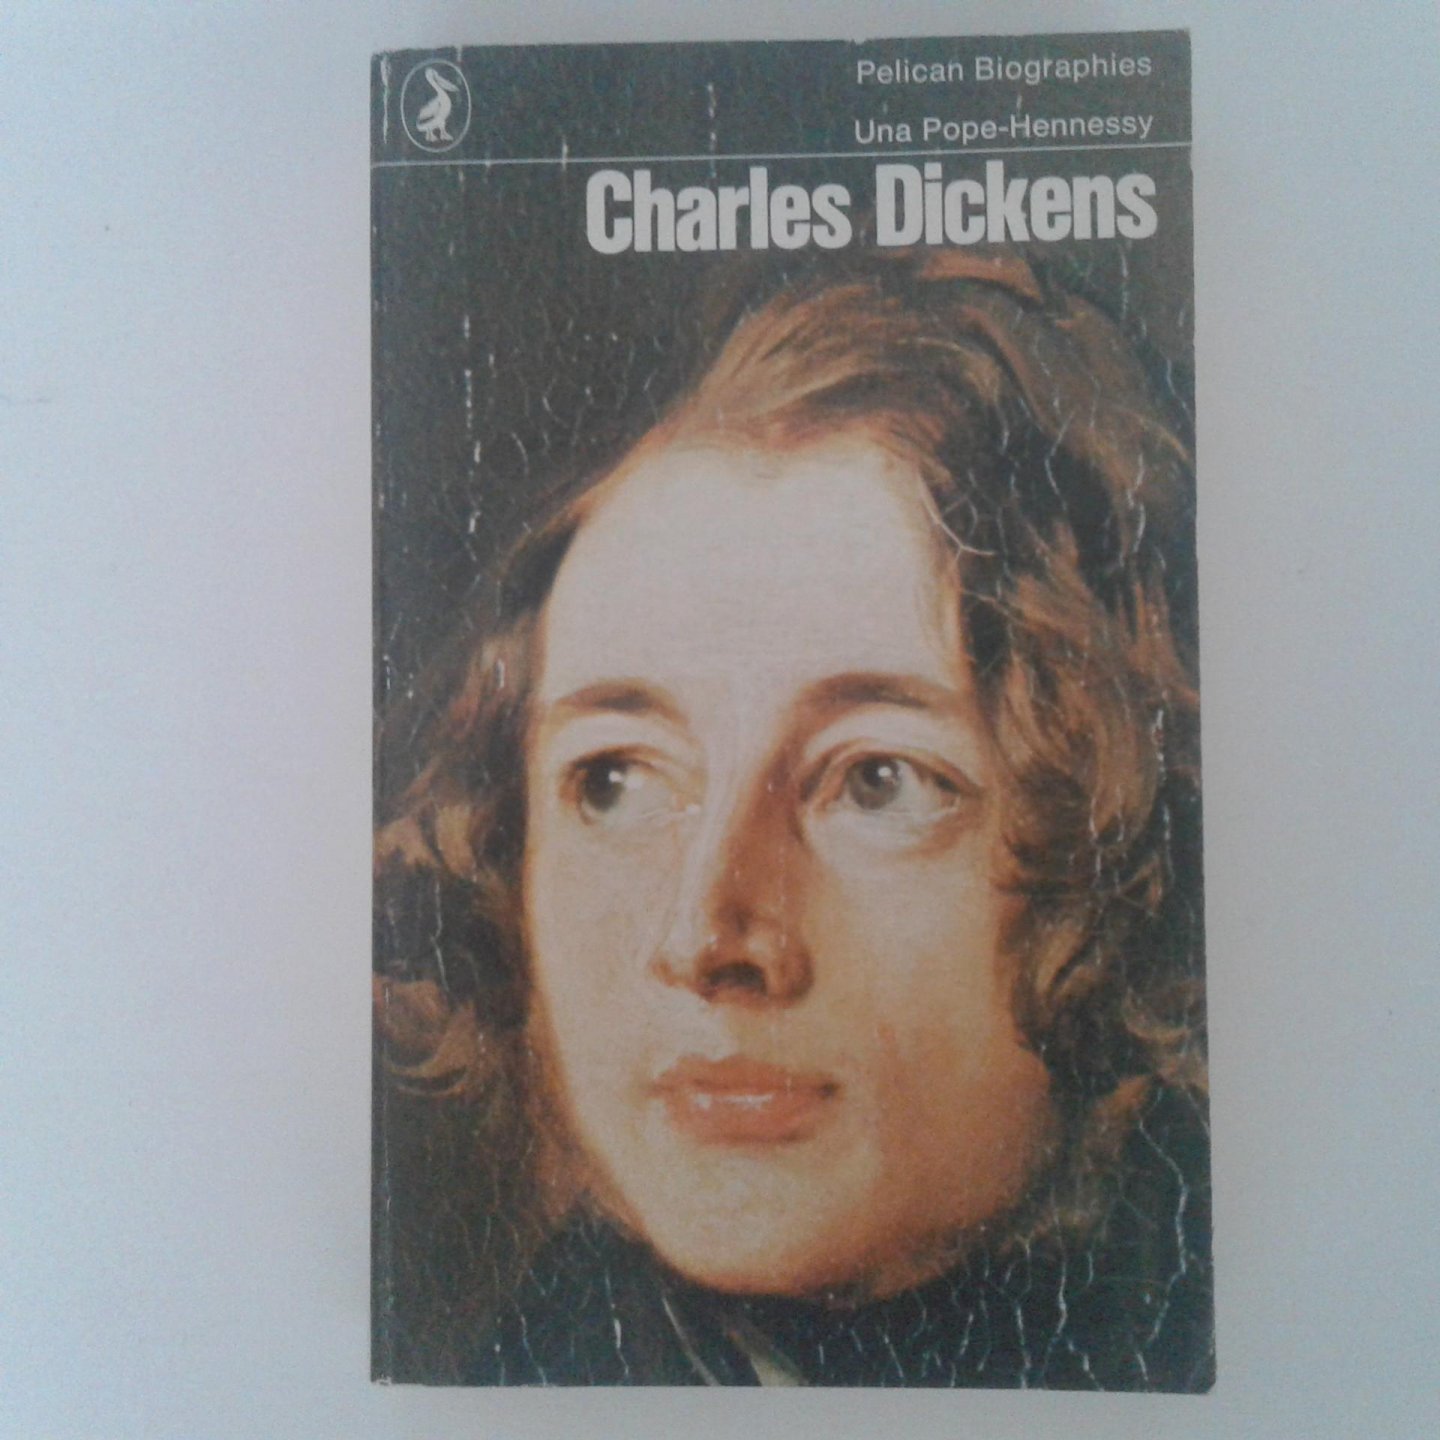 Pope-Hennessy, Una - Charles Dickens